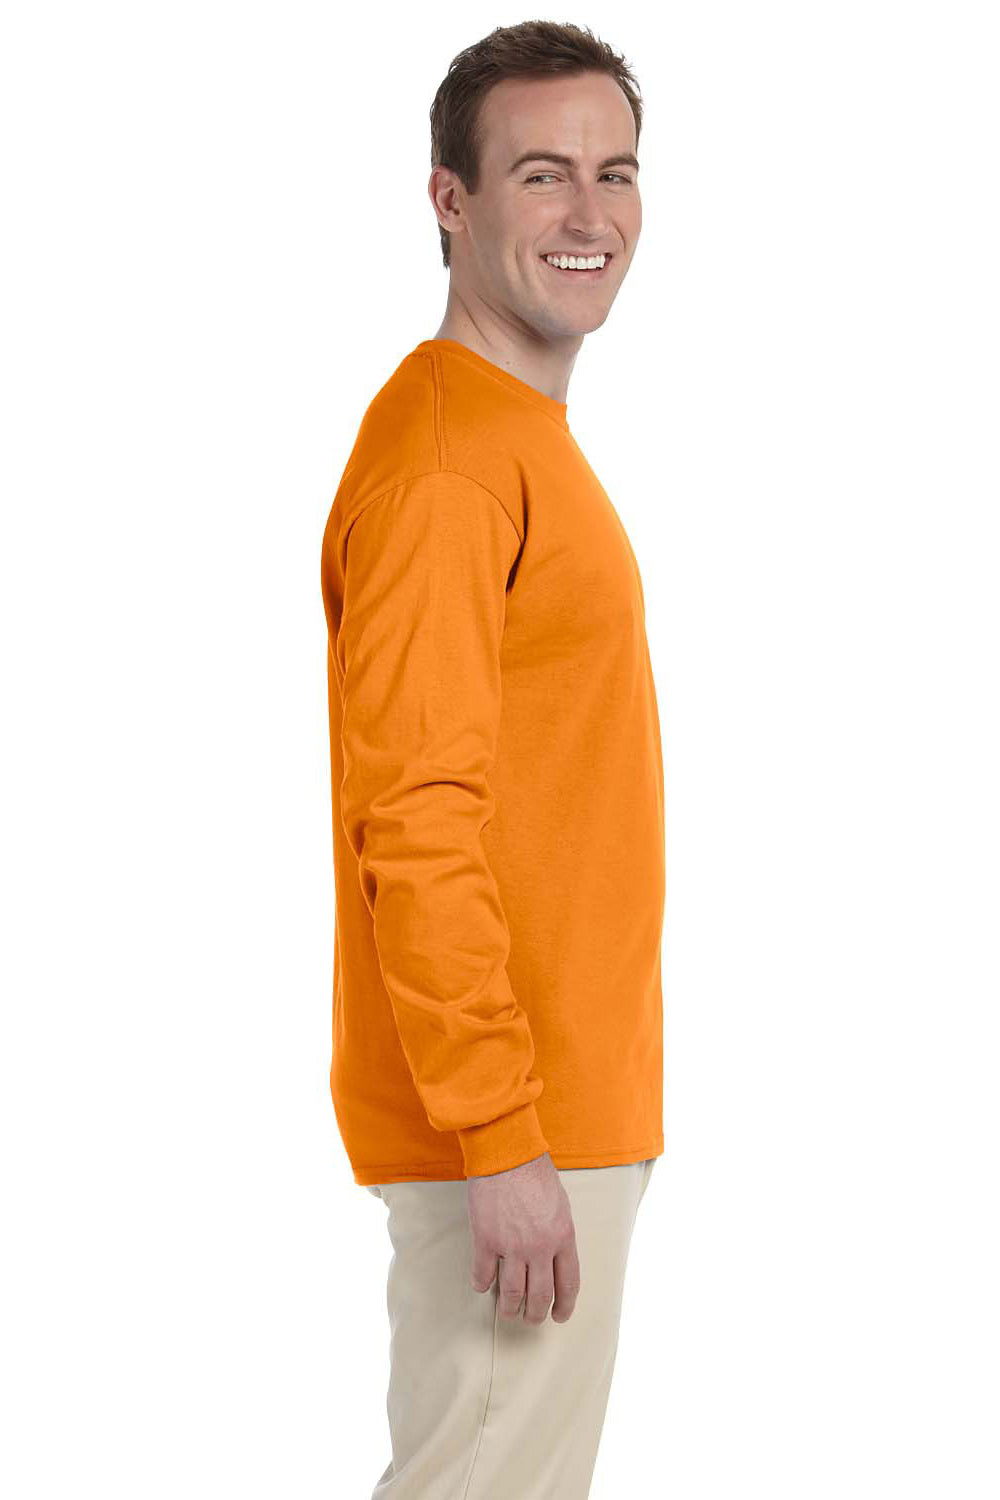 Fruit Of The Loom 4930 Mens HD Jersey Long Sleeve Crewneck T-Shirt Tennessee Orange Side